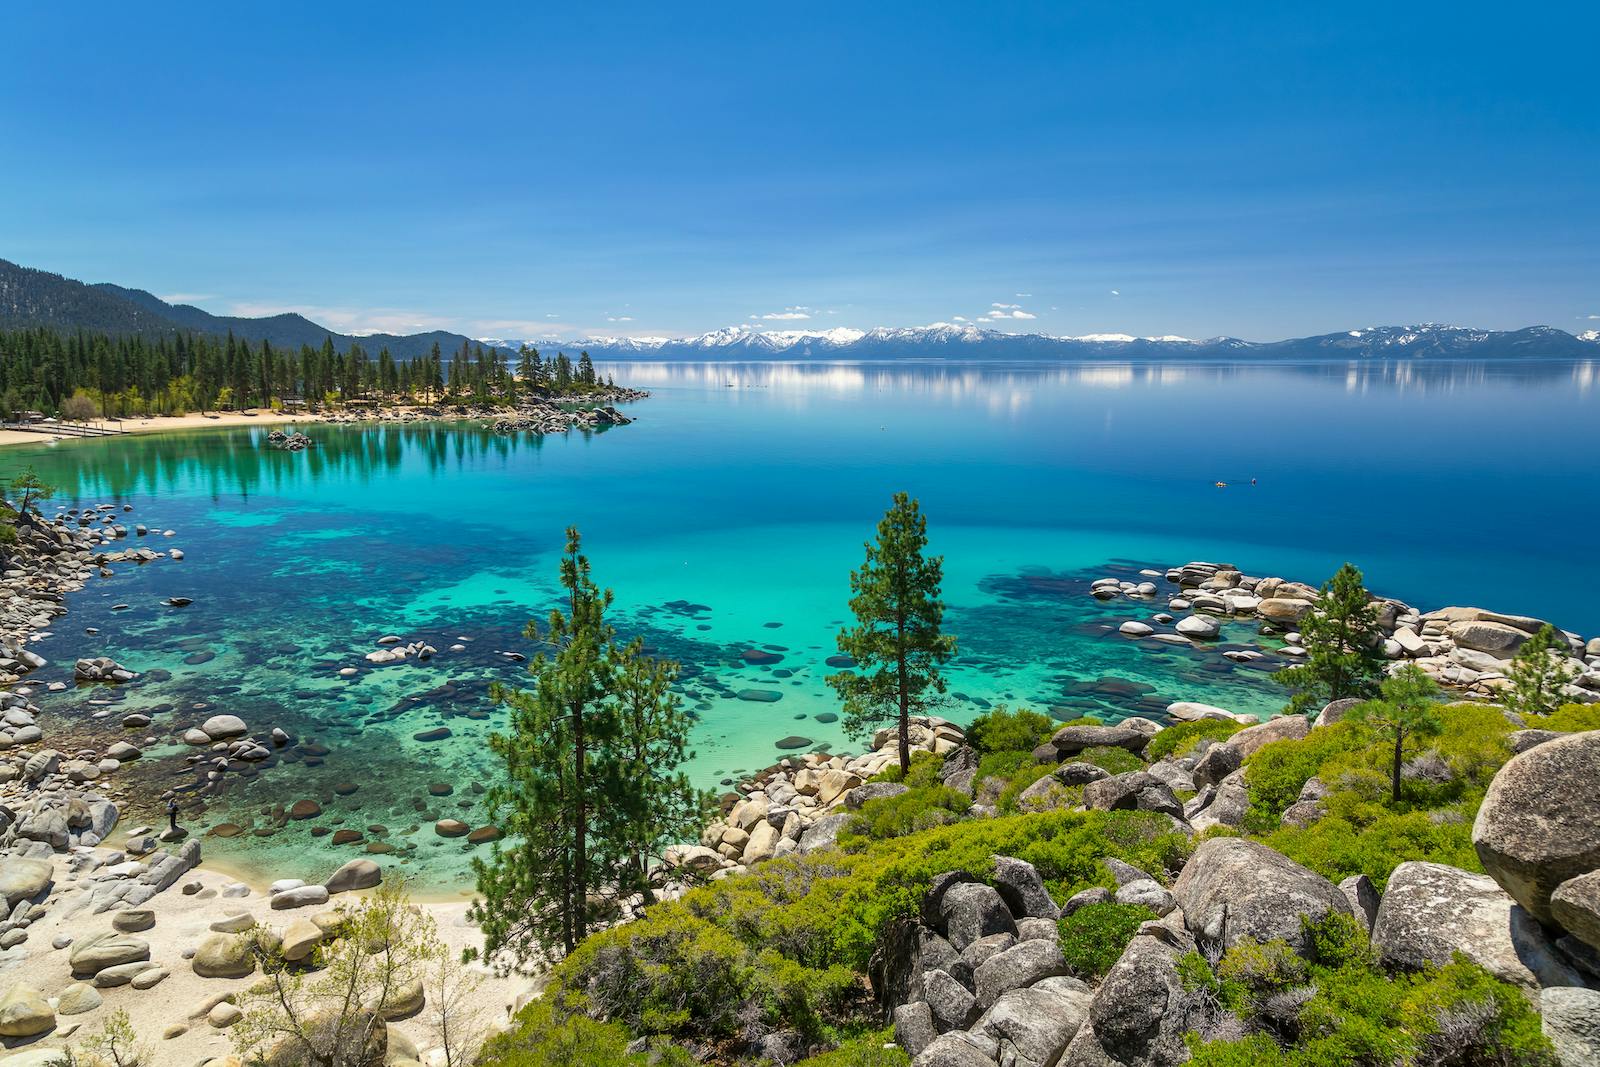 View of Lake Tahoe from the shoreline.